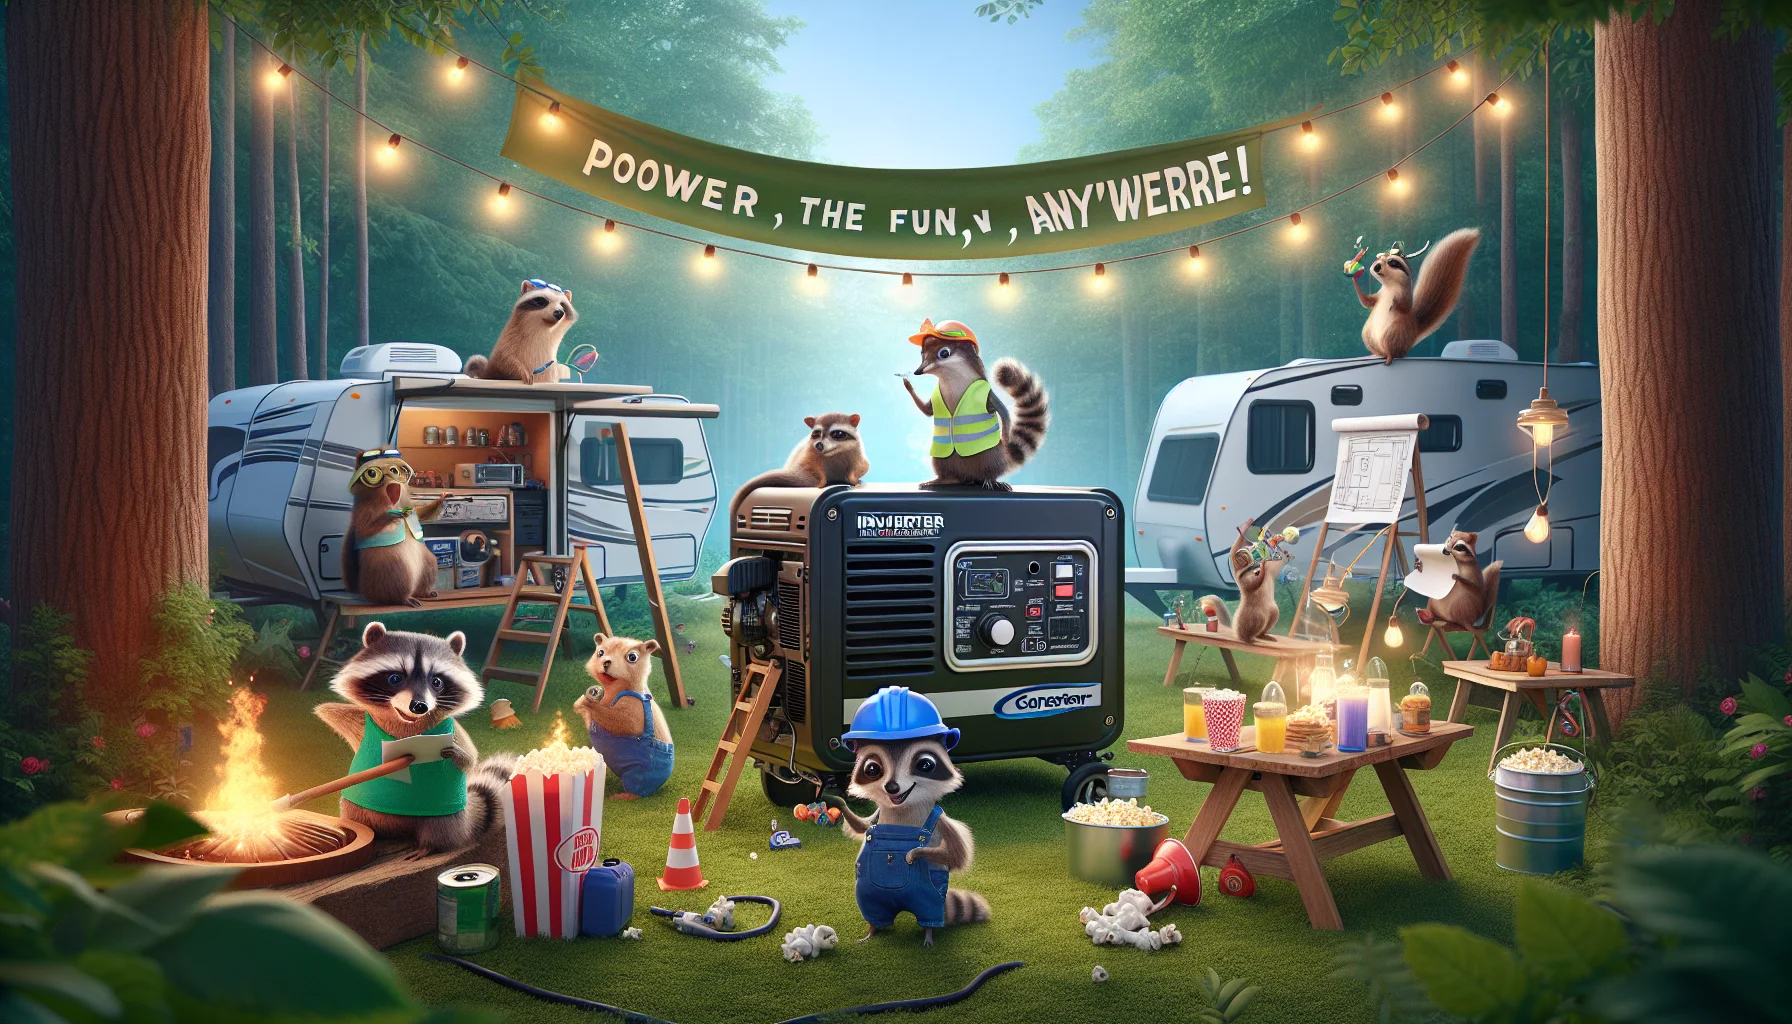 Imagine a humorous scene with RV Inverter Generators set against a lush, verdant campground backdrop. In the scene, a group of whimsical woodland creatures, such as raccoons wearing safety gear, squirrels with tool belts, and birds with blueprints, operate these generators. They are busily generating electricity to power a small, festive celebration complete with fairy lights, a popcorn machine, and a tiny stage for a solo bird performer. Add captivating slogans such as 'Camping with a Spark' and 'Power the Fun, Anywhere!' to make it an enticing advertisement for RV inverter generators.